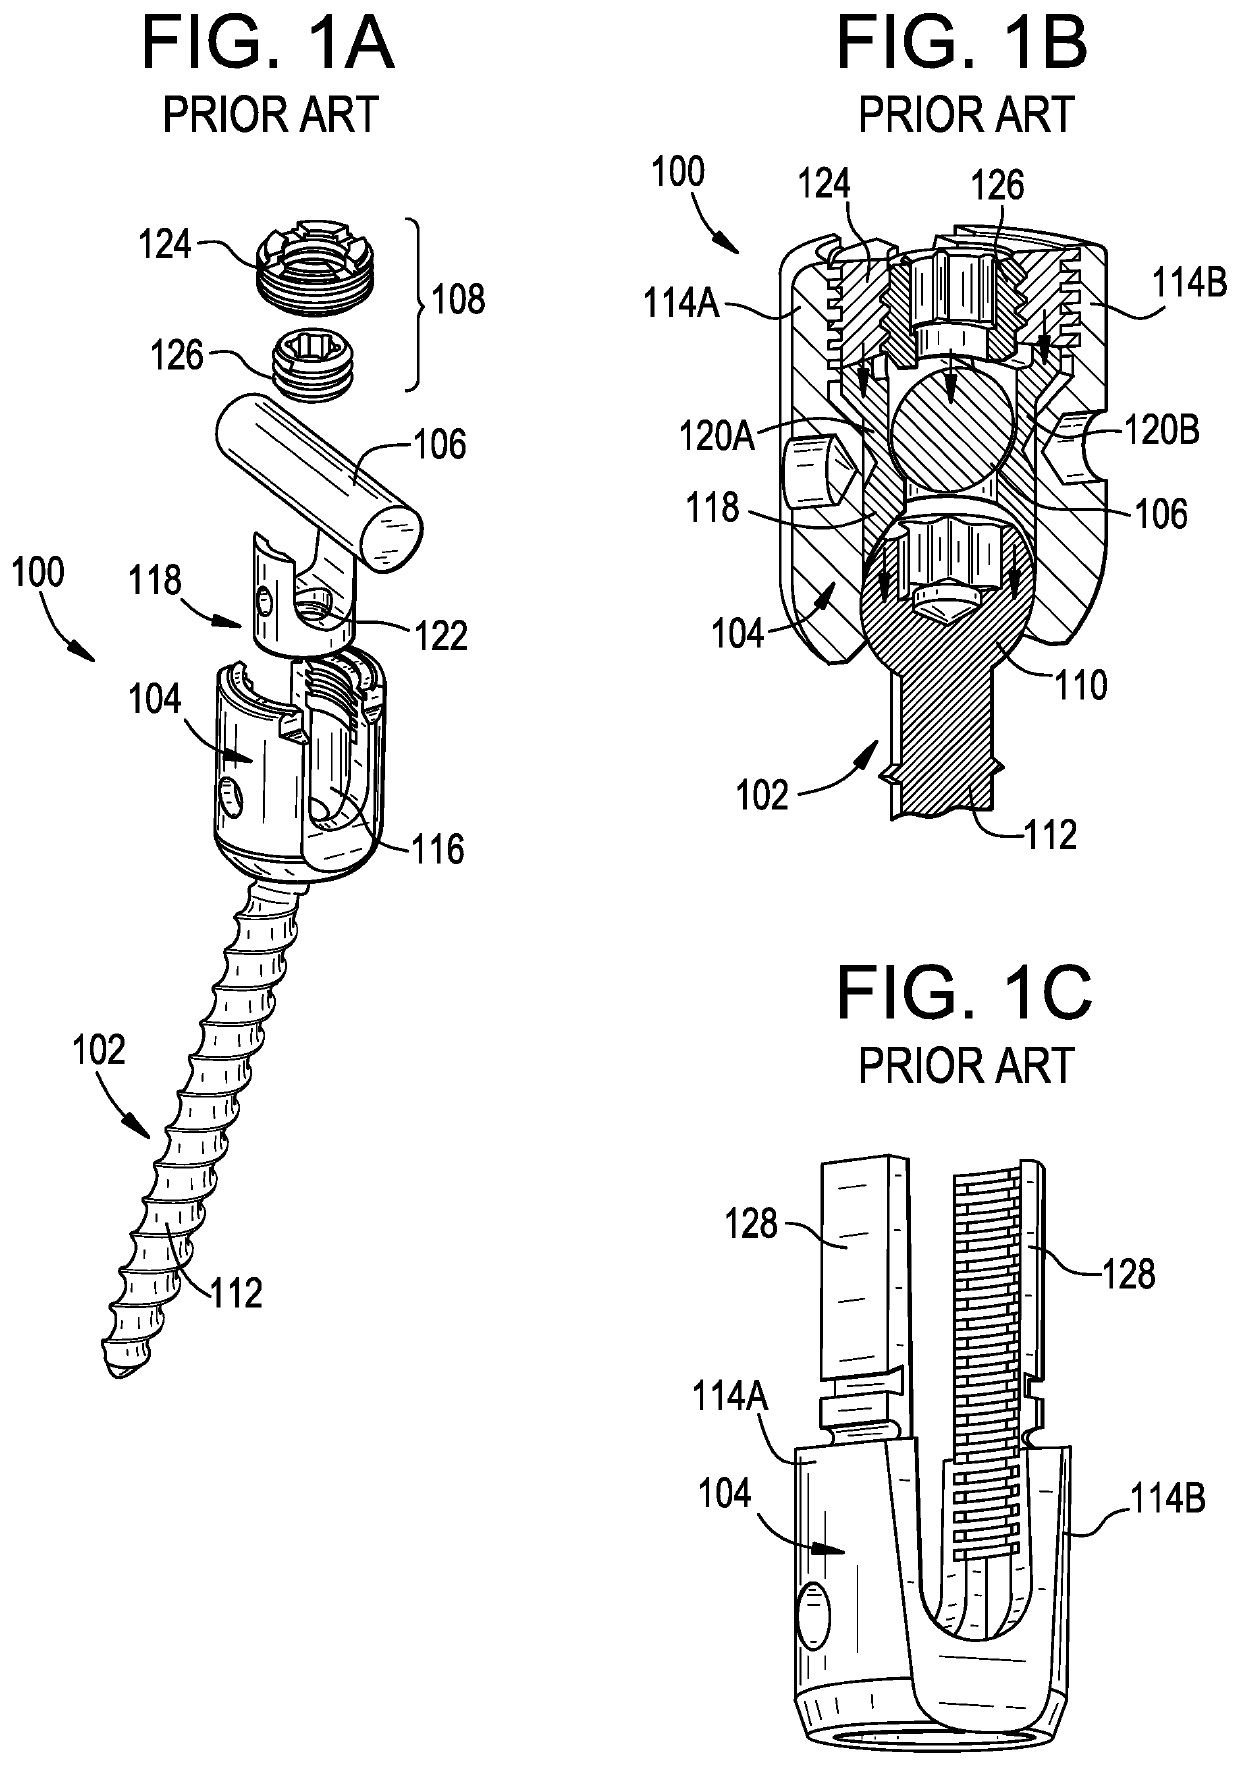 Multipoint angled fixation implants for multiple screws and related methods